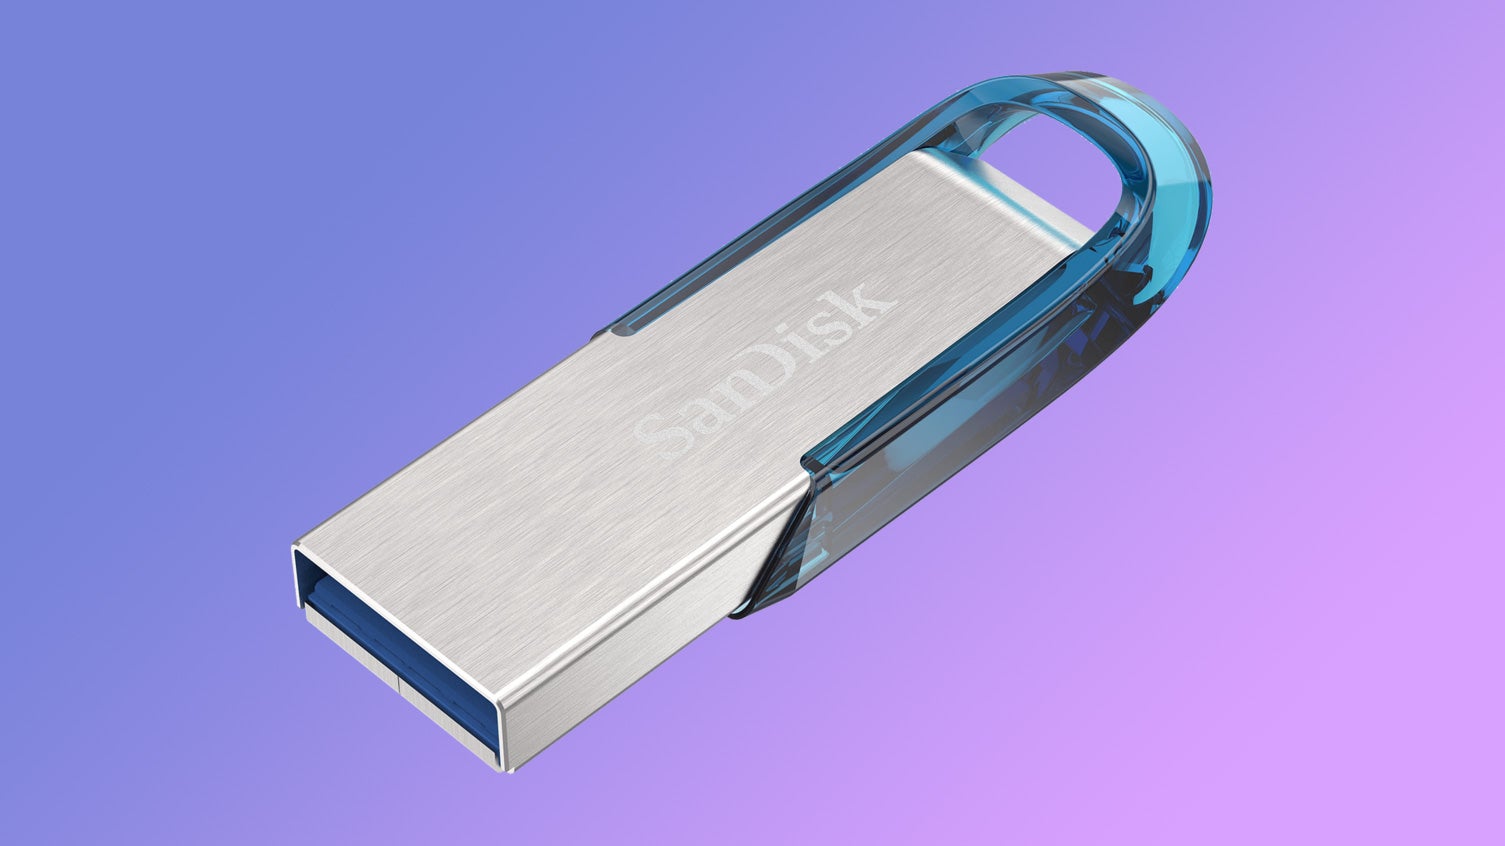 Install Windows (or whatever) with this 32GB flash drive for a fiver